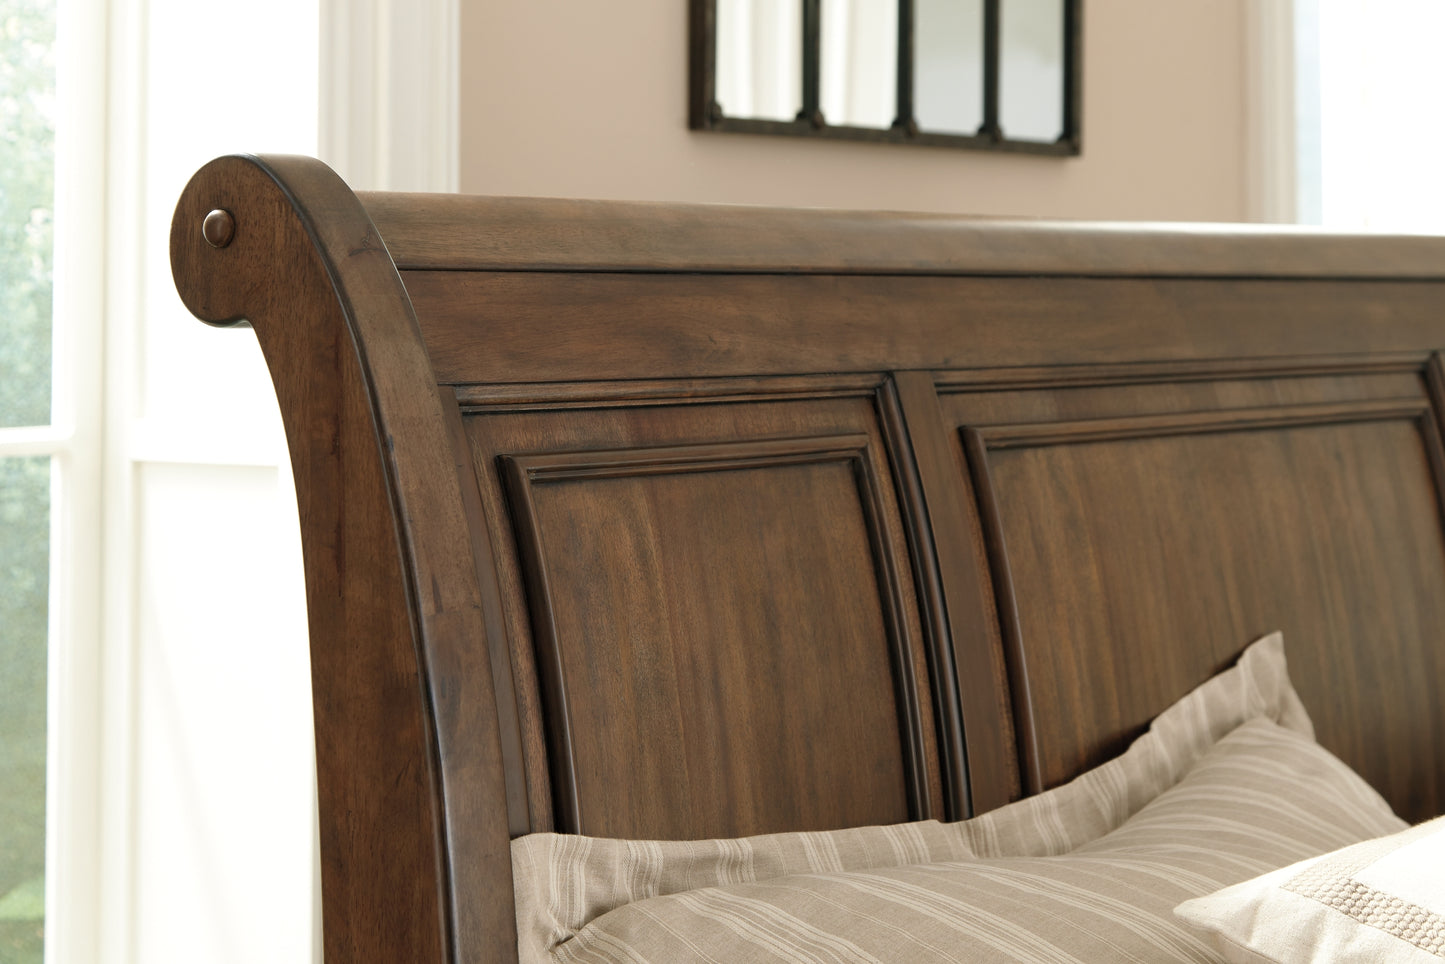 Ashley Express - Robbinsdale  Sleigh Bed With Storage